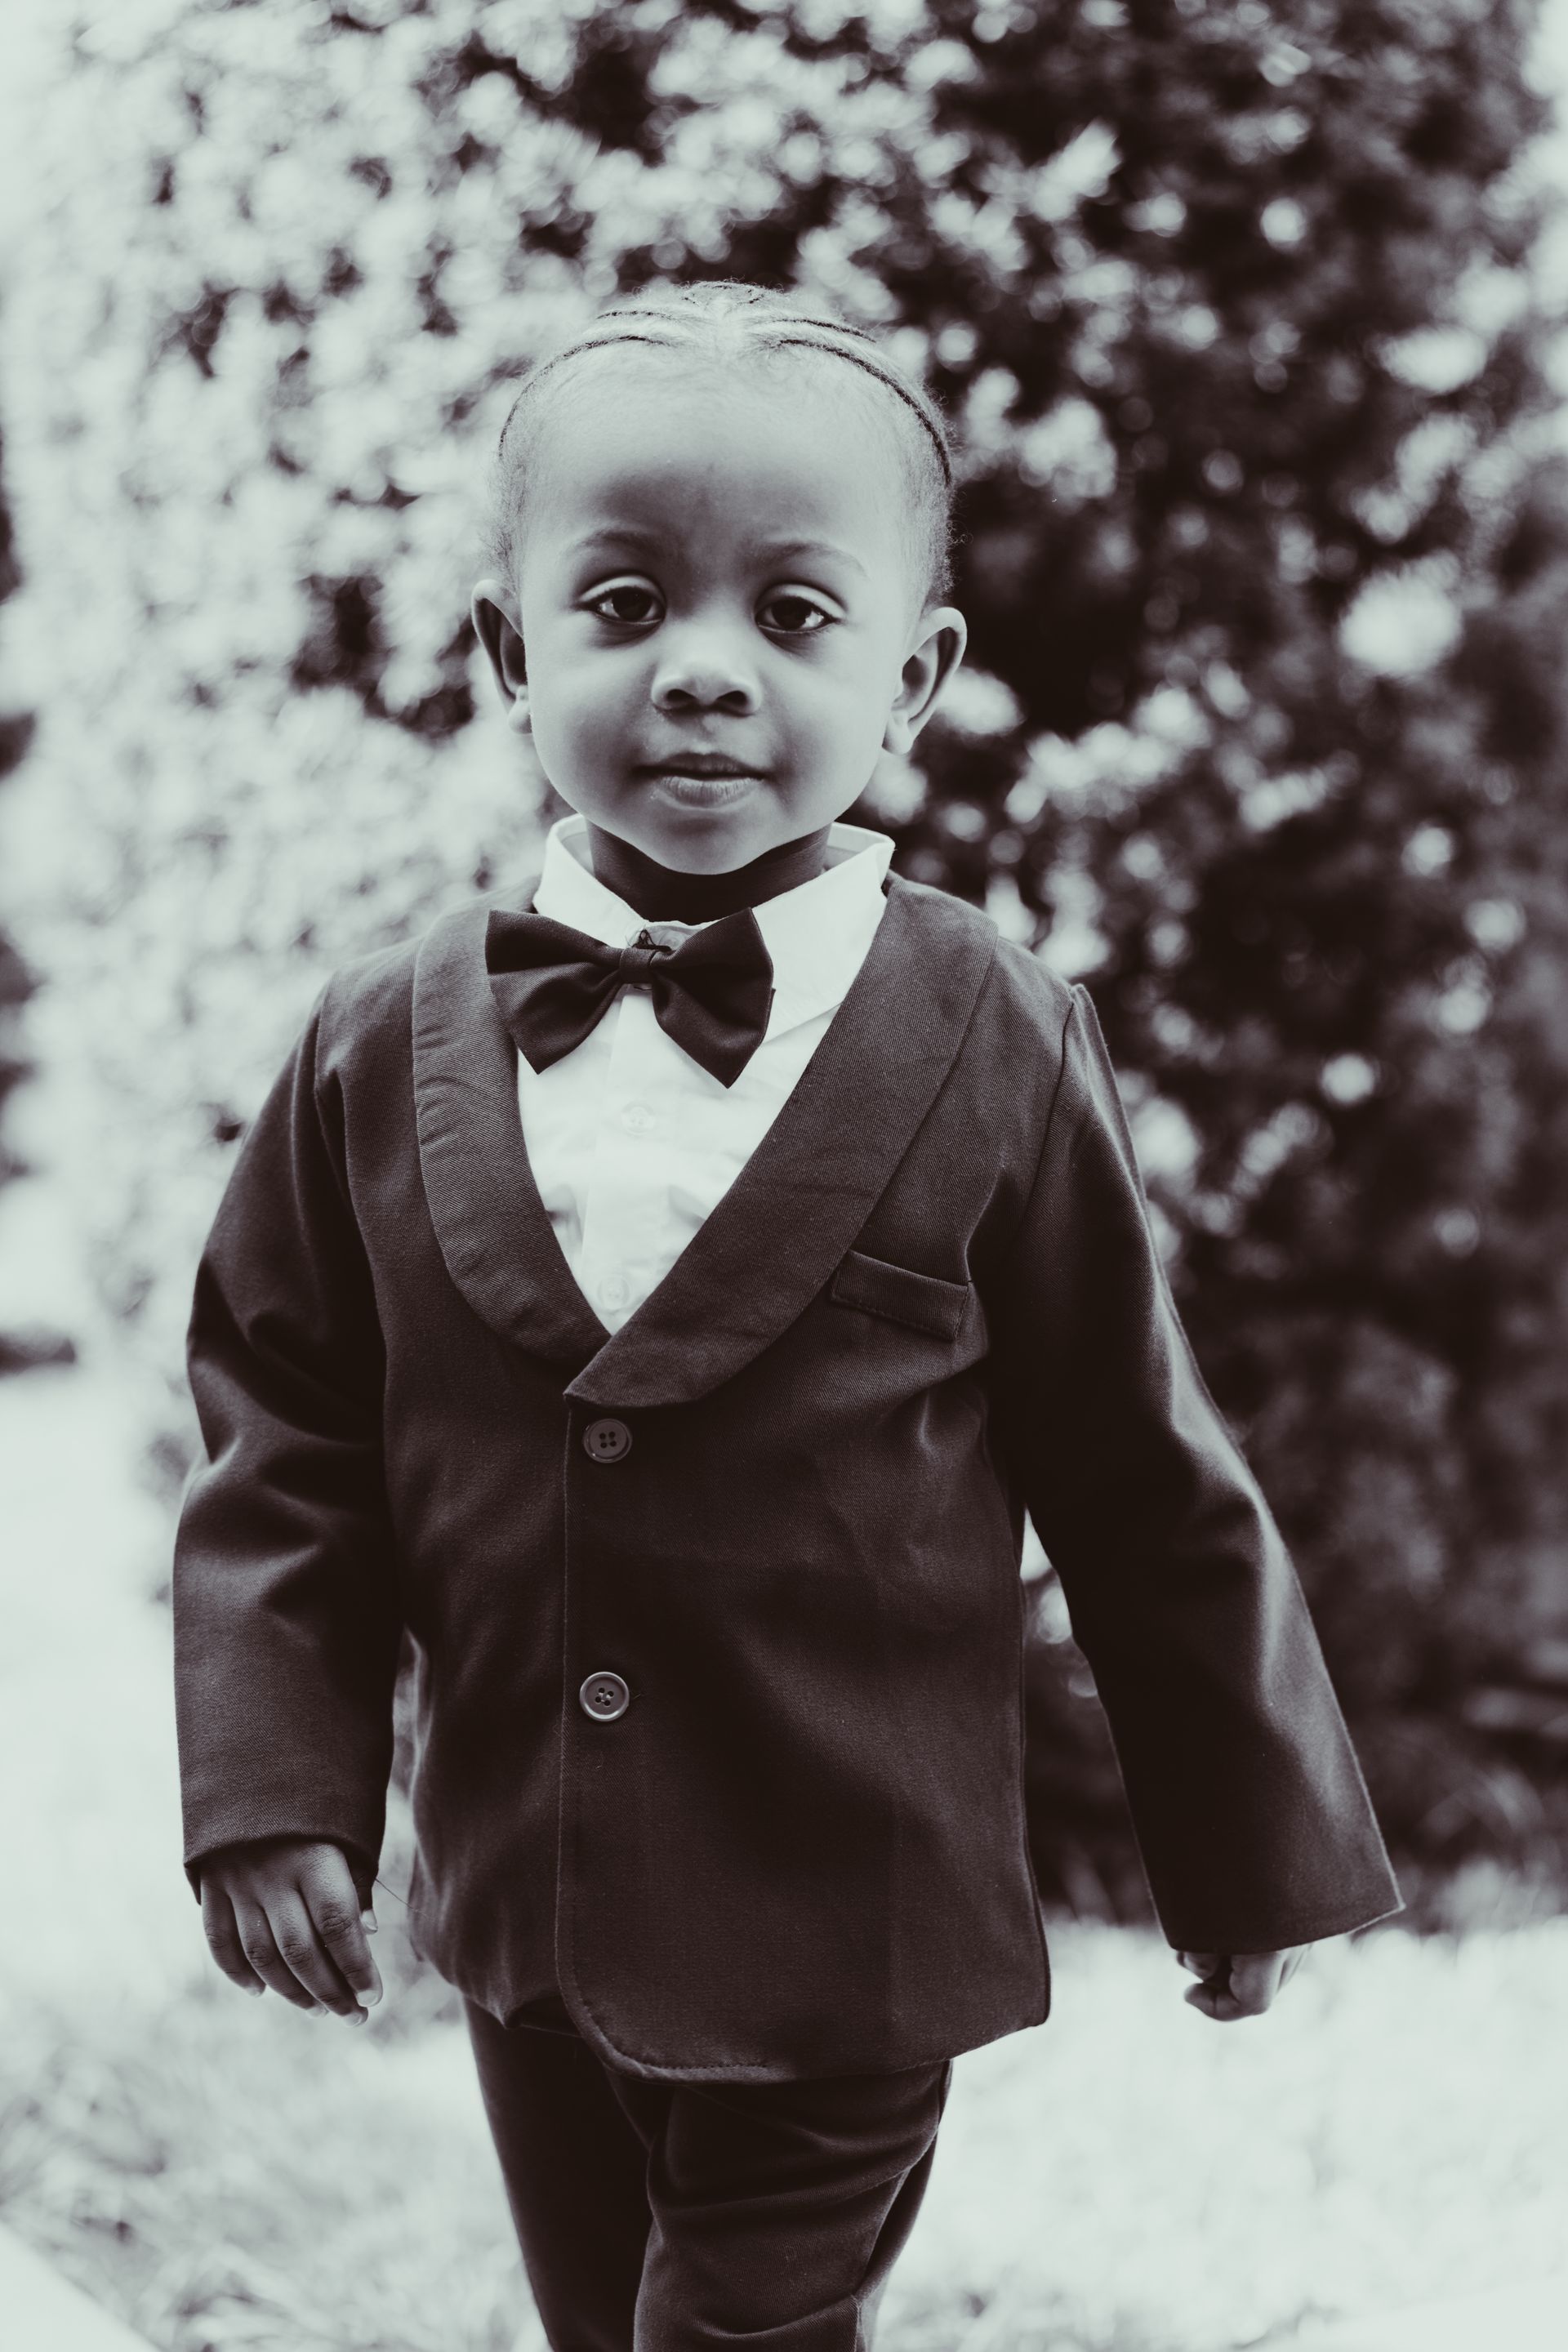 A black and white photo of a little boy wearing a tuxedo and bow tie.